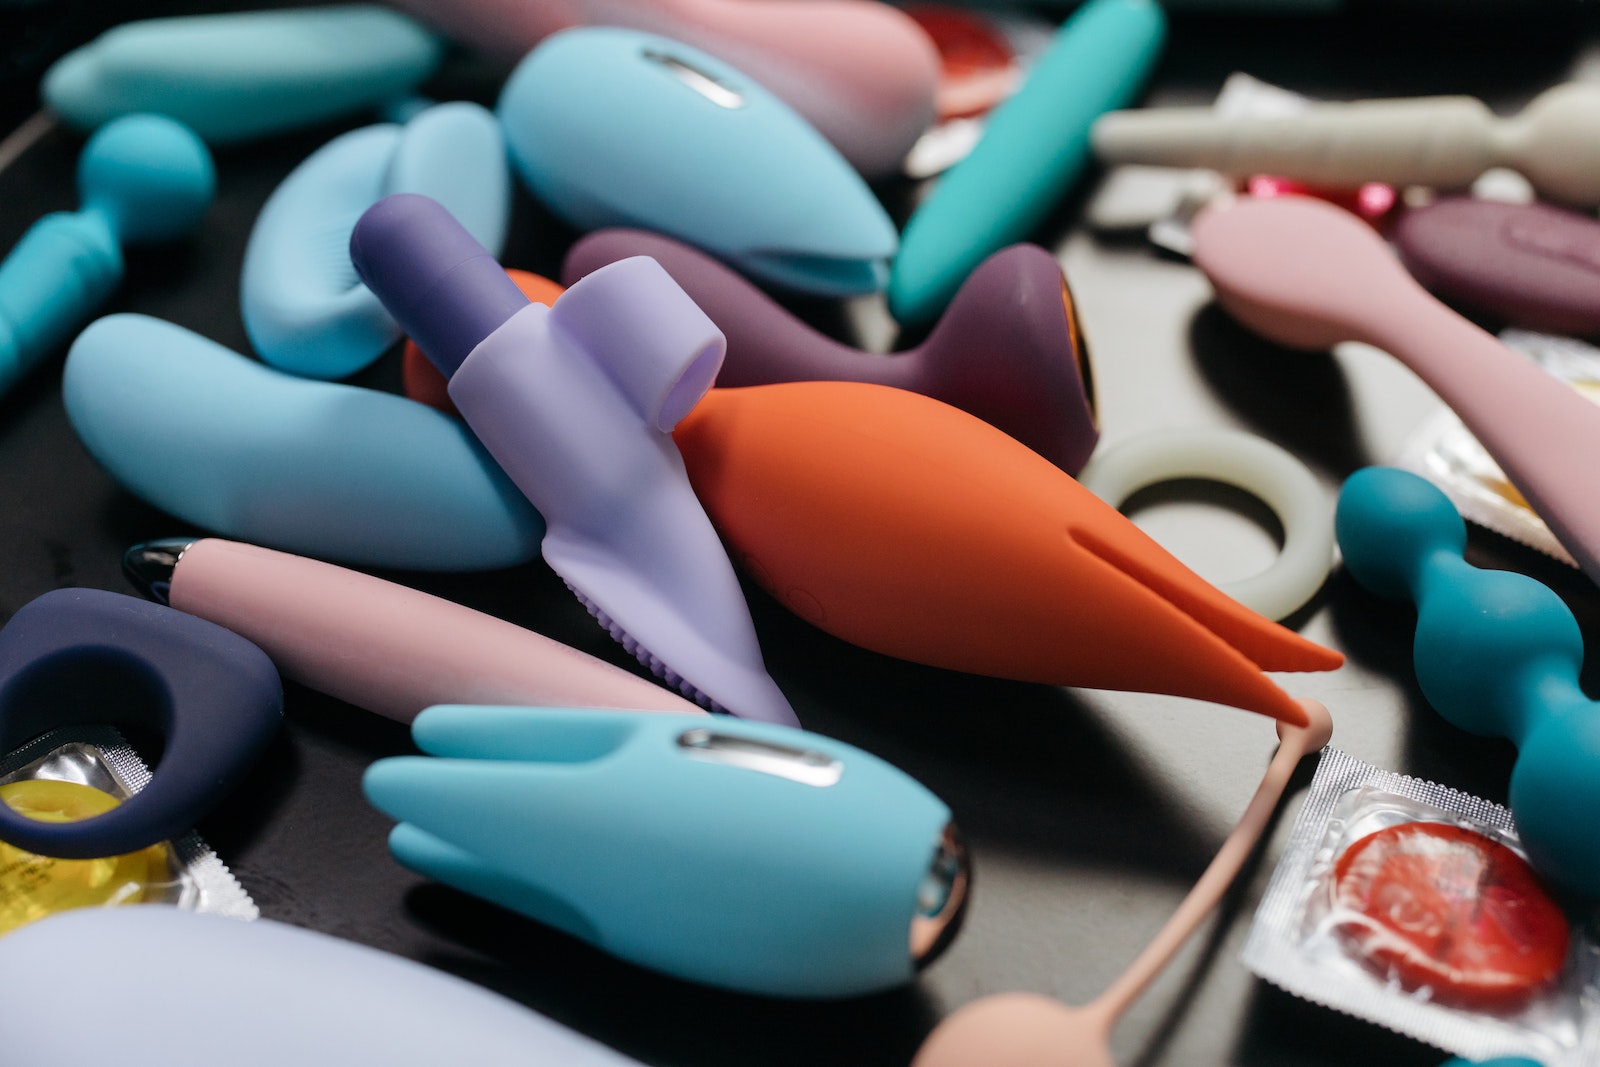 Assorted Adult Toys in Close Up Photography